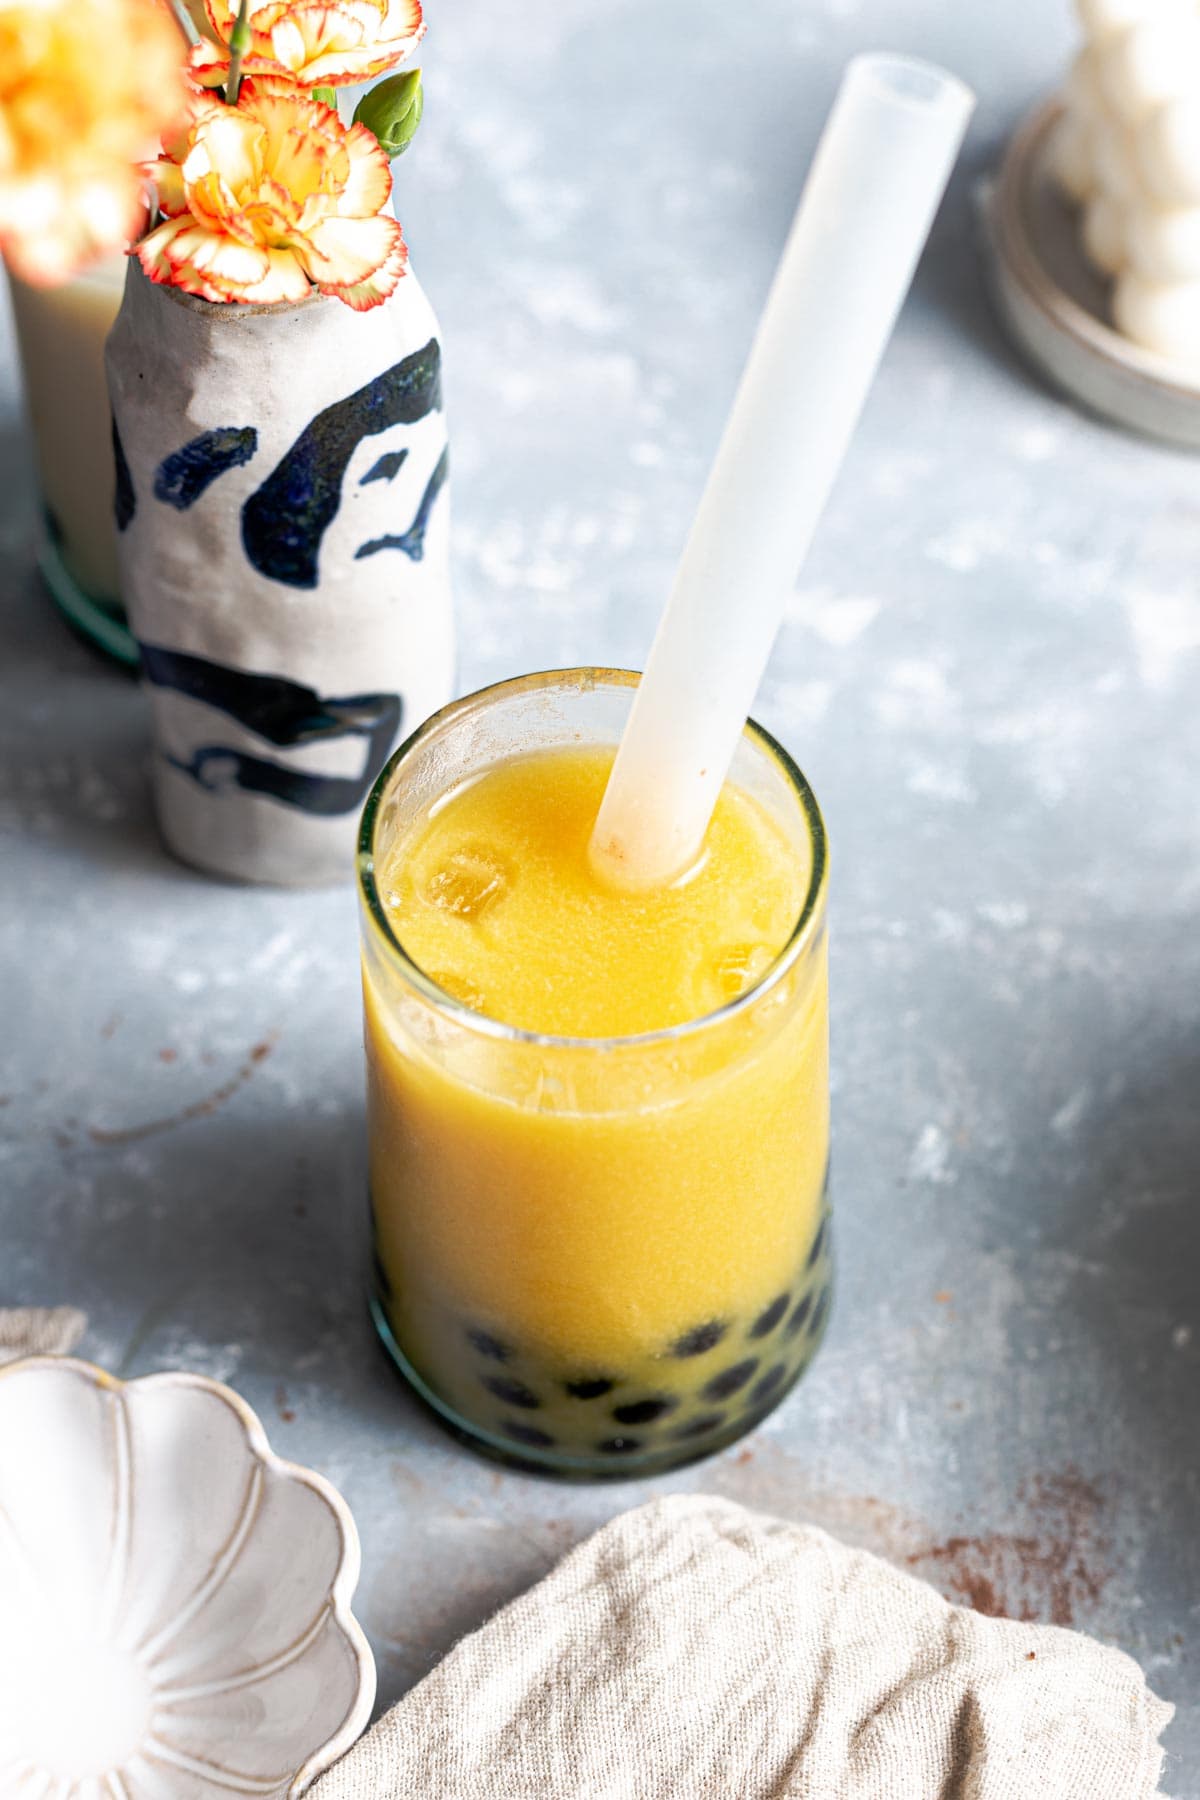 A large glass filled with mango milk tea with tapioca pearls and a straw.